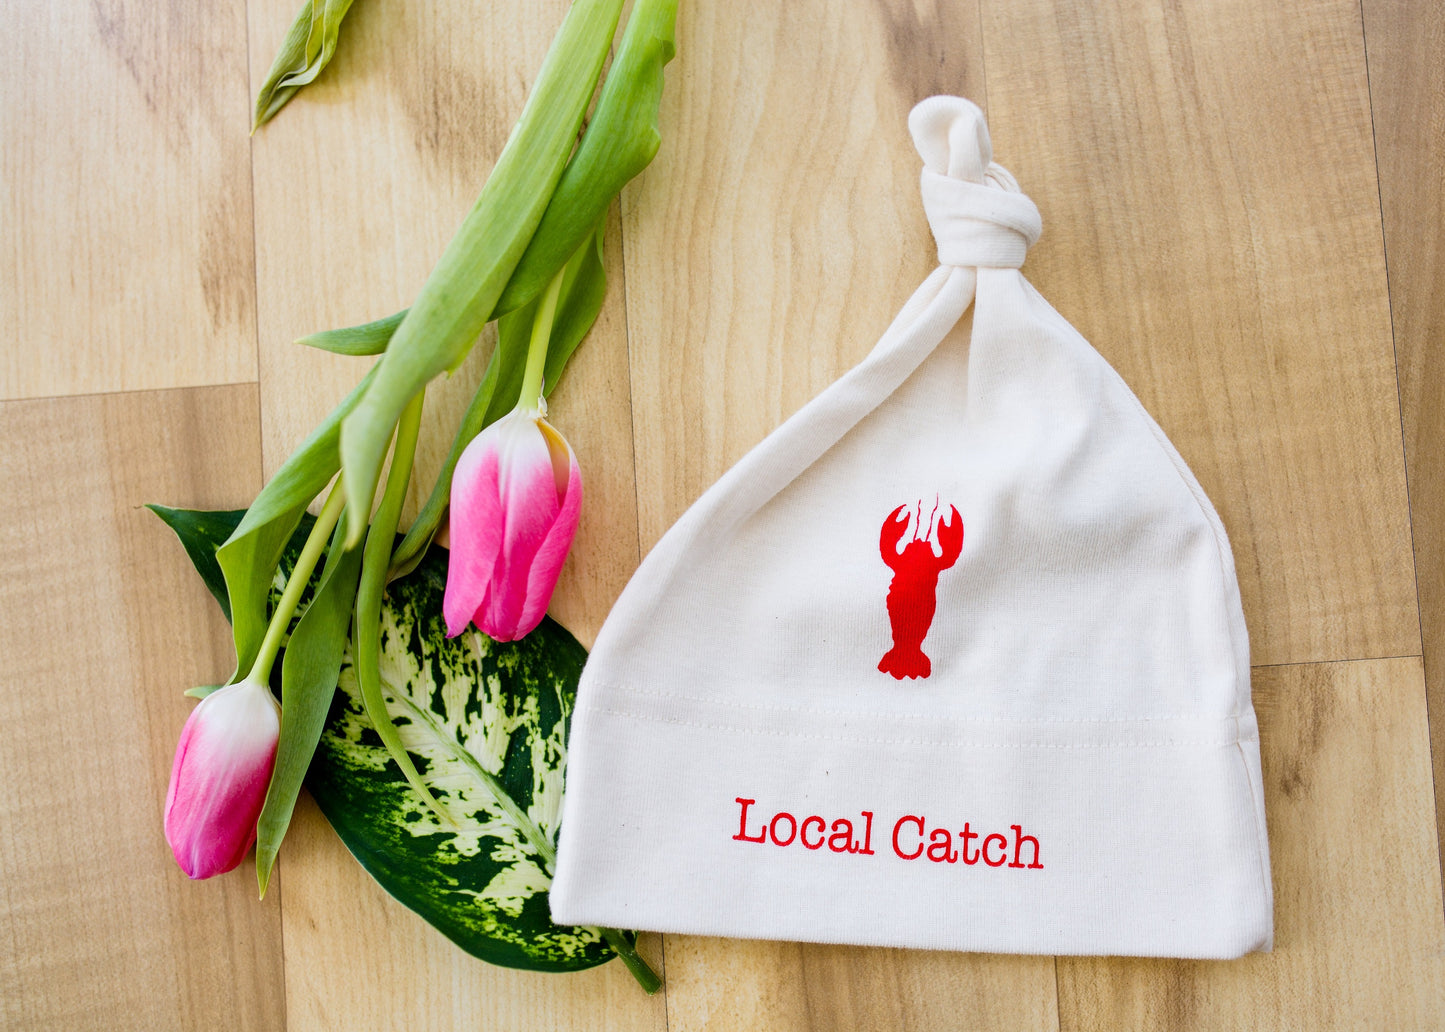 Lobster Local Catch Lobster Long Sleeve Romper & Hat Gift Set